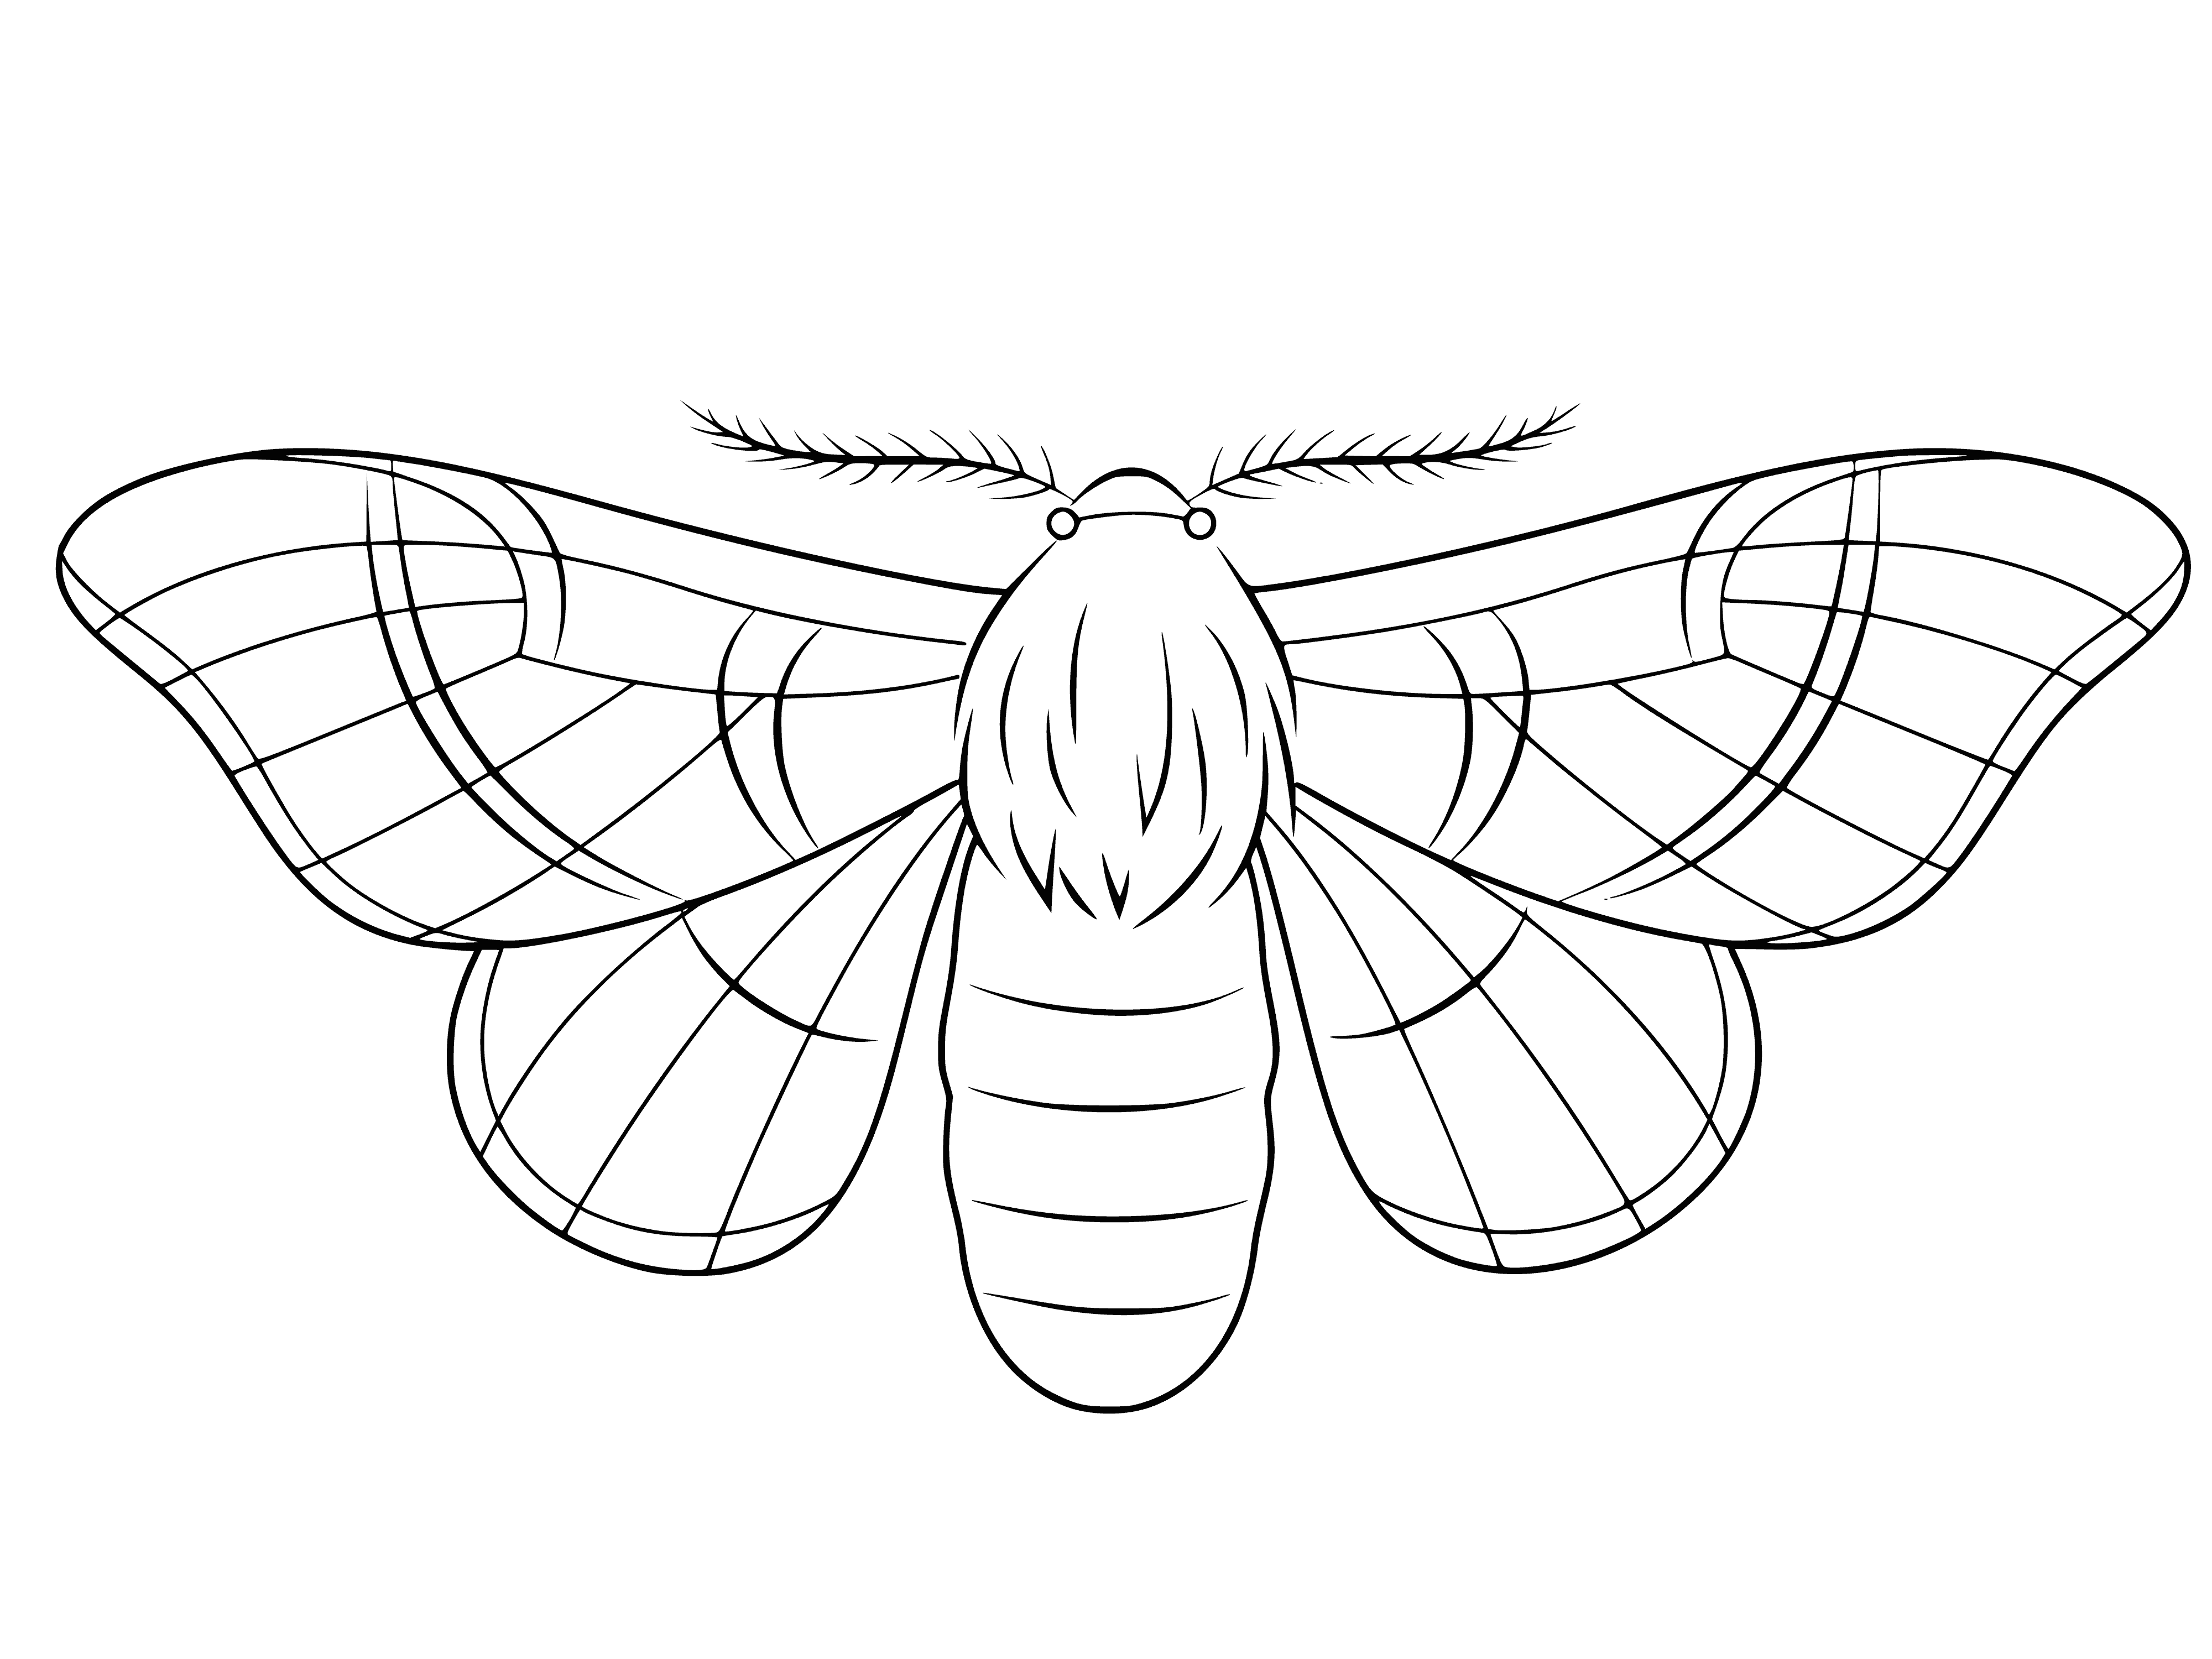 coloring page: Butterfly with wings outstretched surrounded by a blur of greens & blues, surrounded by many smaller, differently-colored butterflies. #Coloring #Butterflies